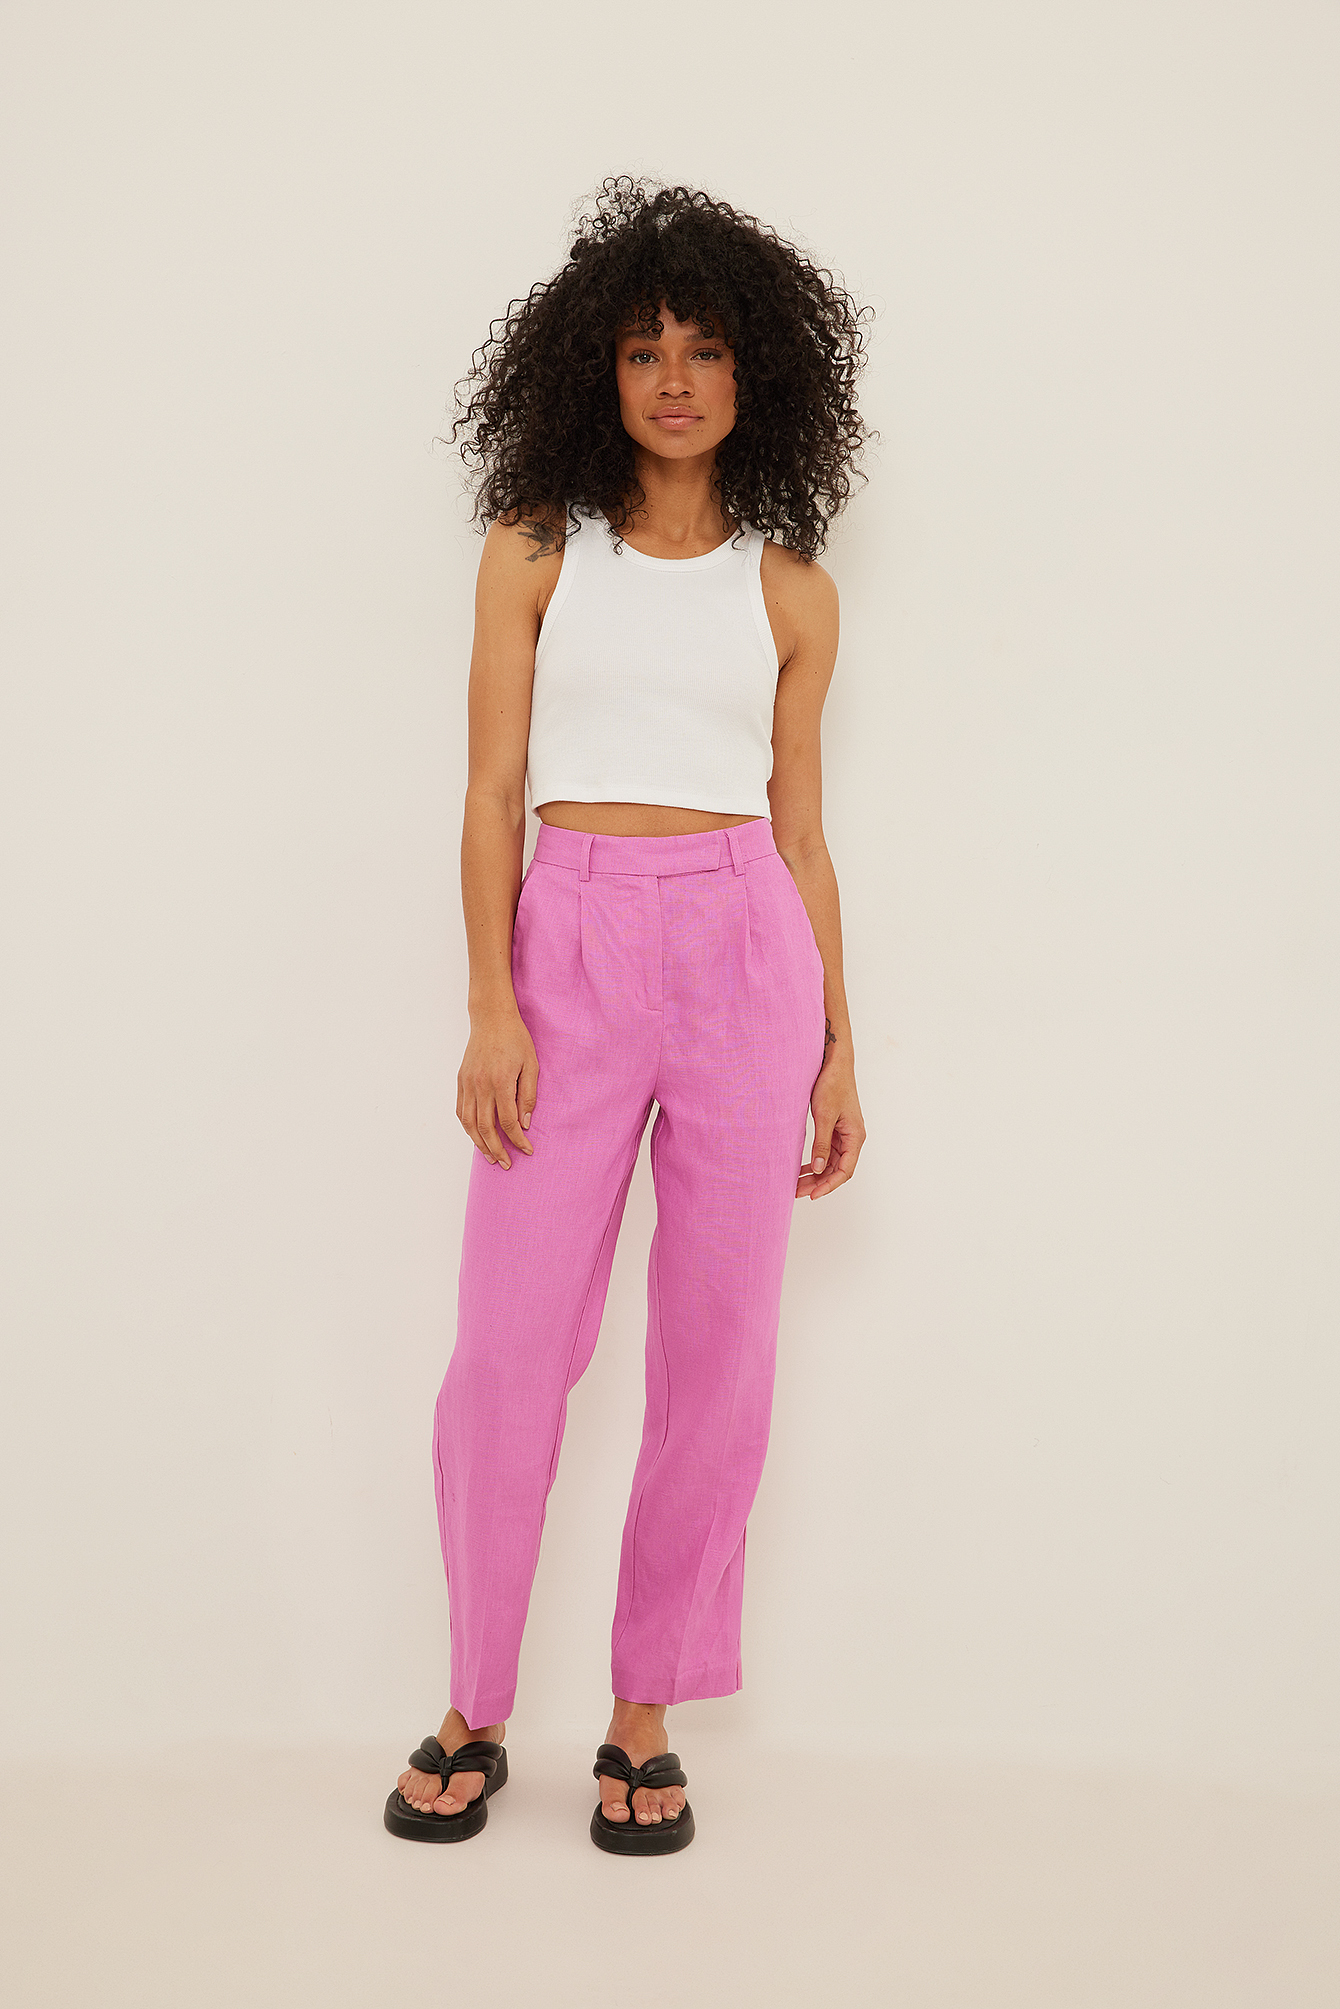 Linen Cropped Pants Outfit.